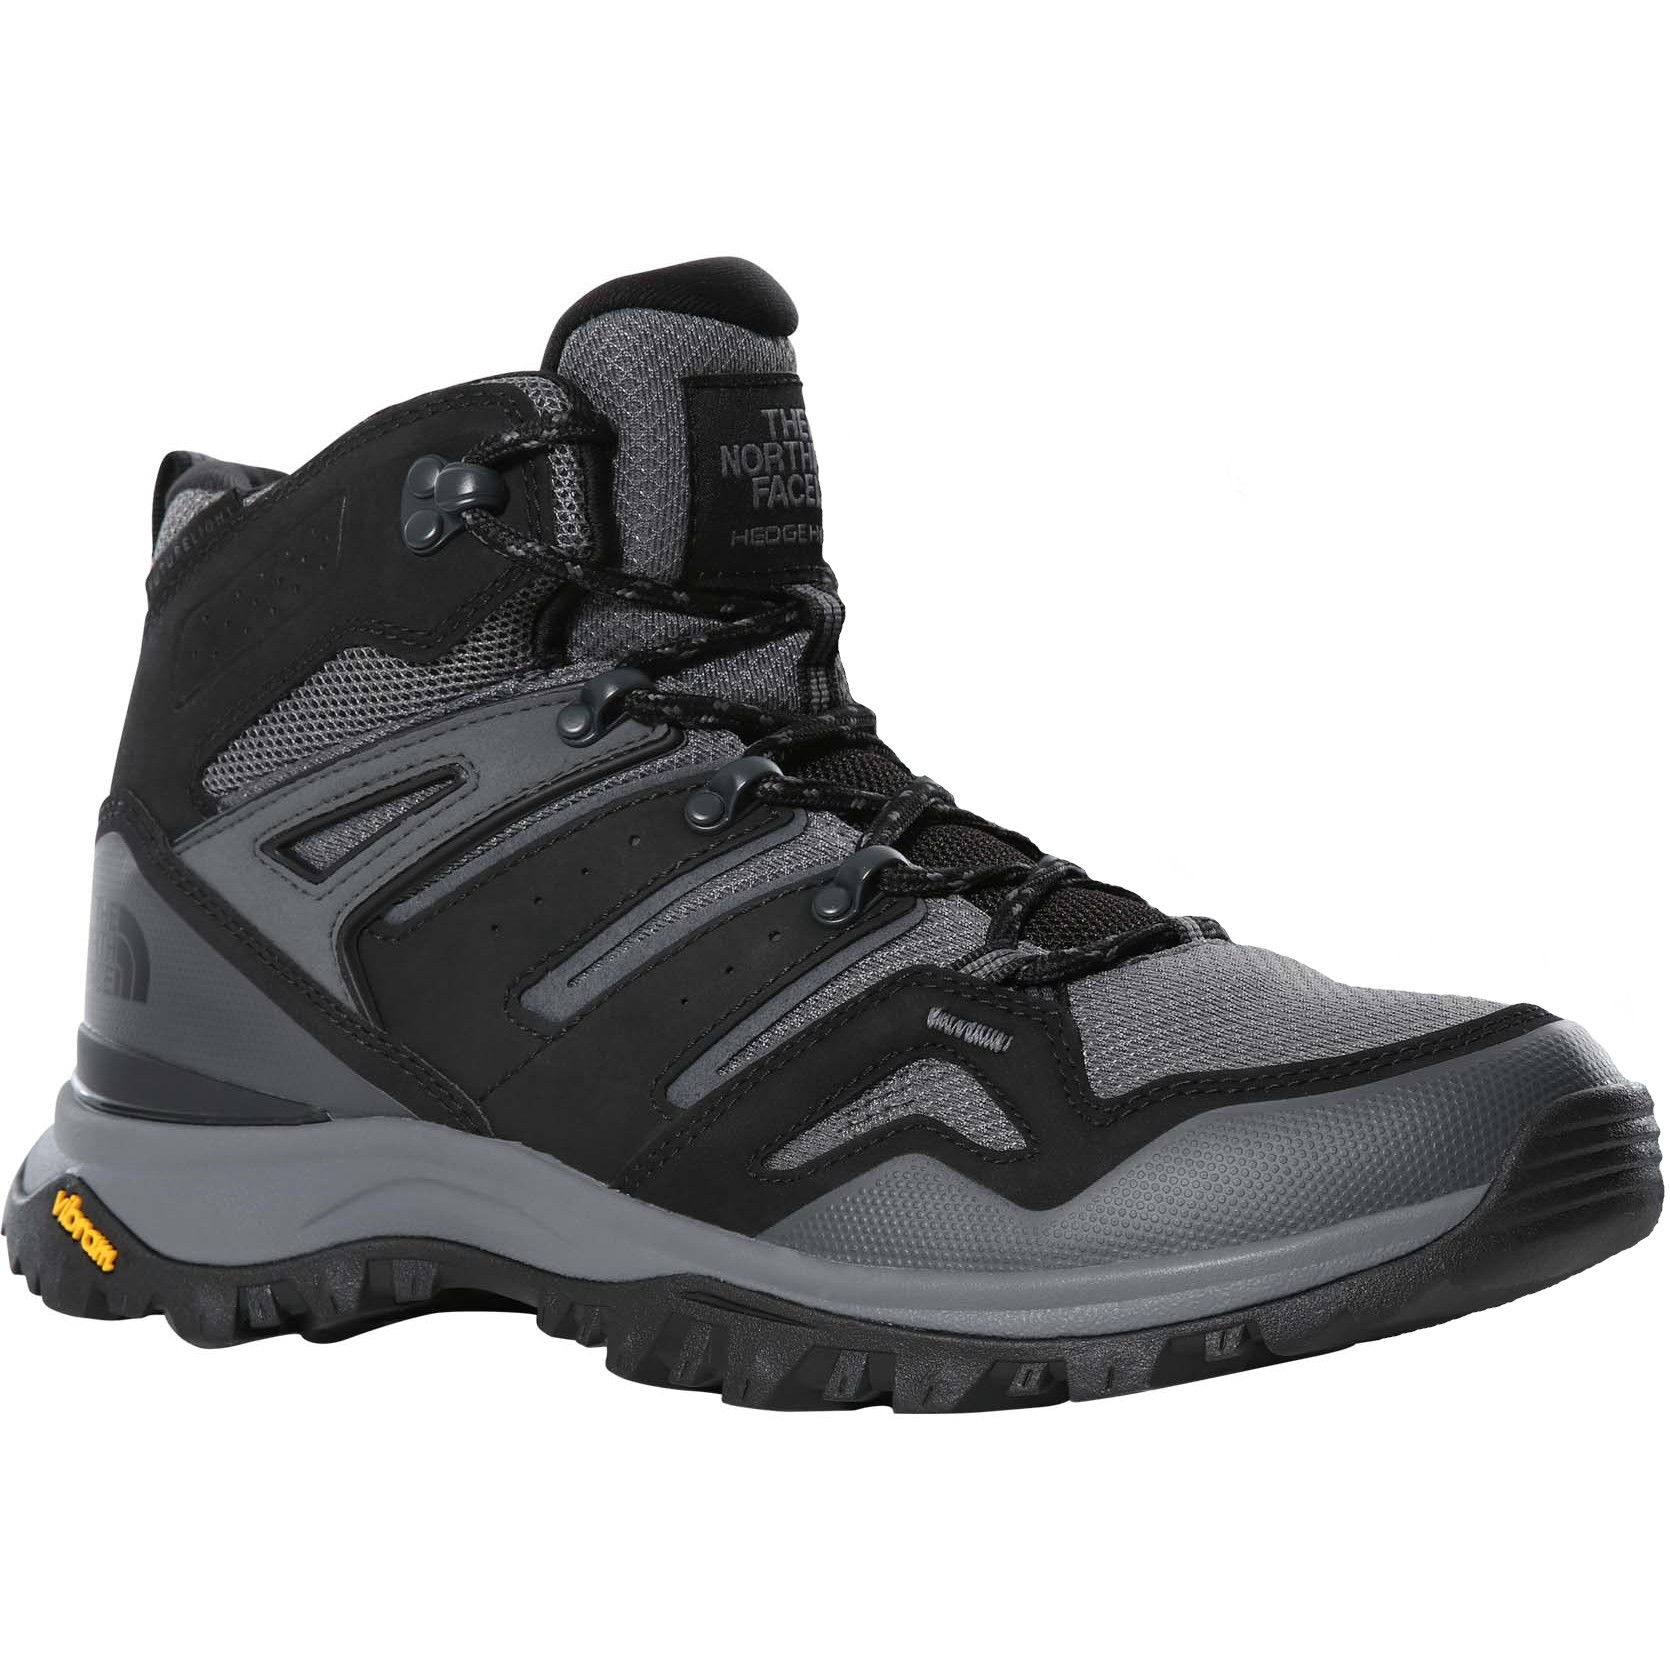 The North Face Hedgehog Mid FutureLight Hiking Boot